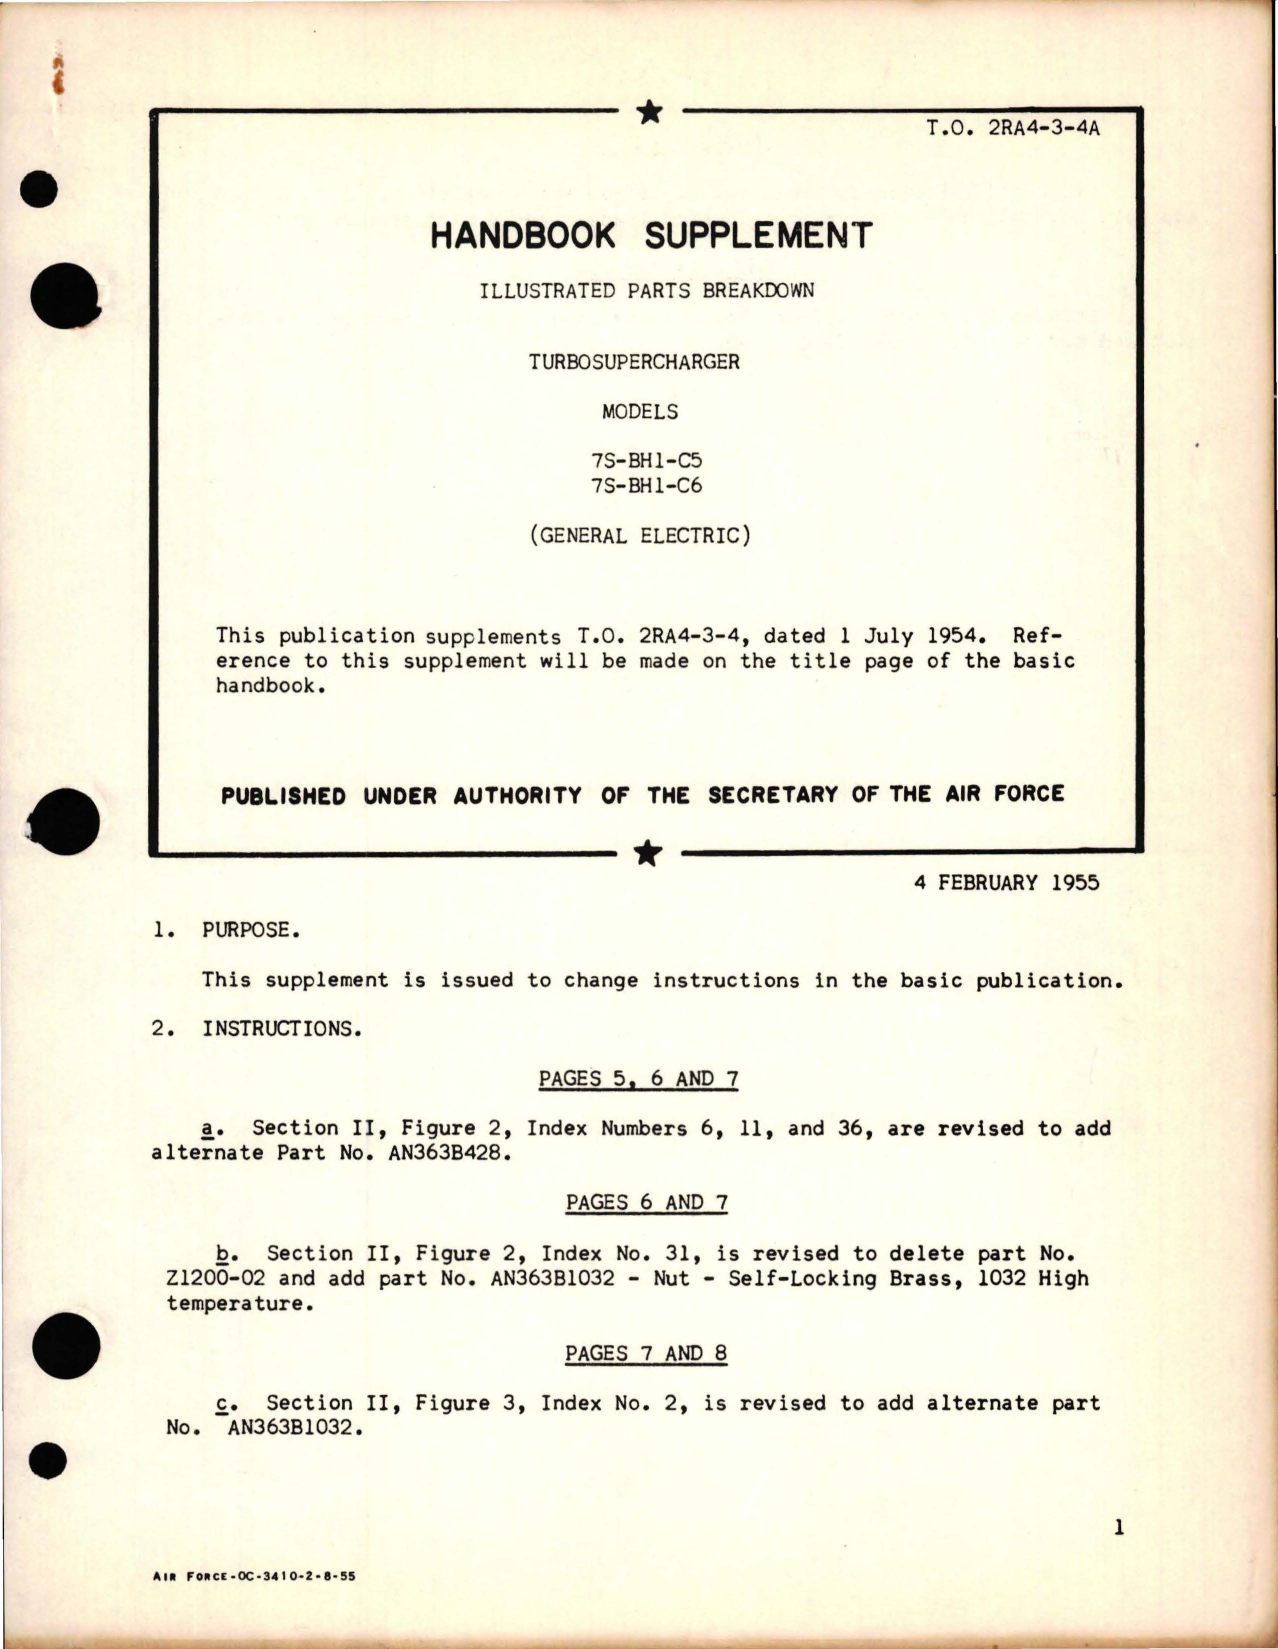 Sample page 1 from AirCorps Library document: Supplement to Illustrated Parts Breakdown for Turbosuperchargers - Models 7S-BH1-C5 and 7S-BH1-C6 